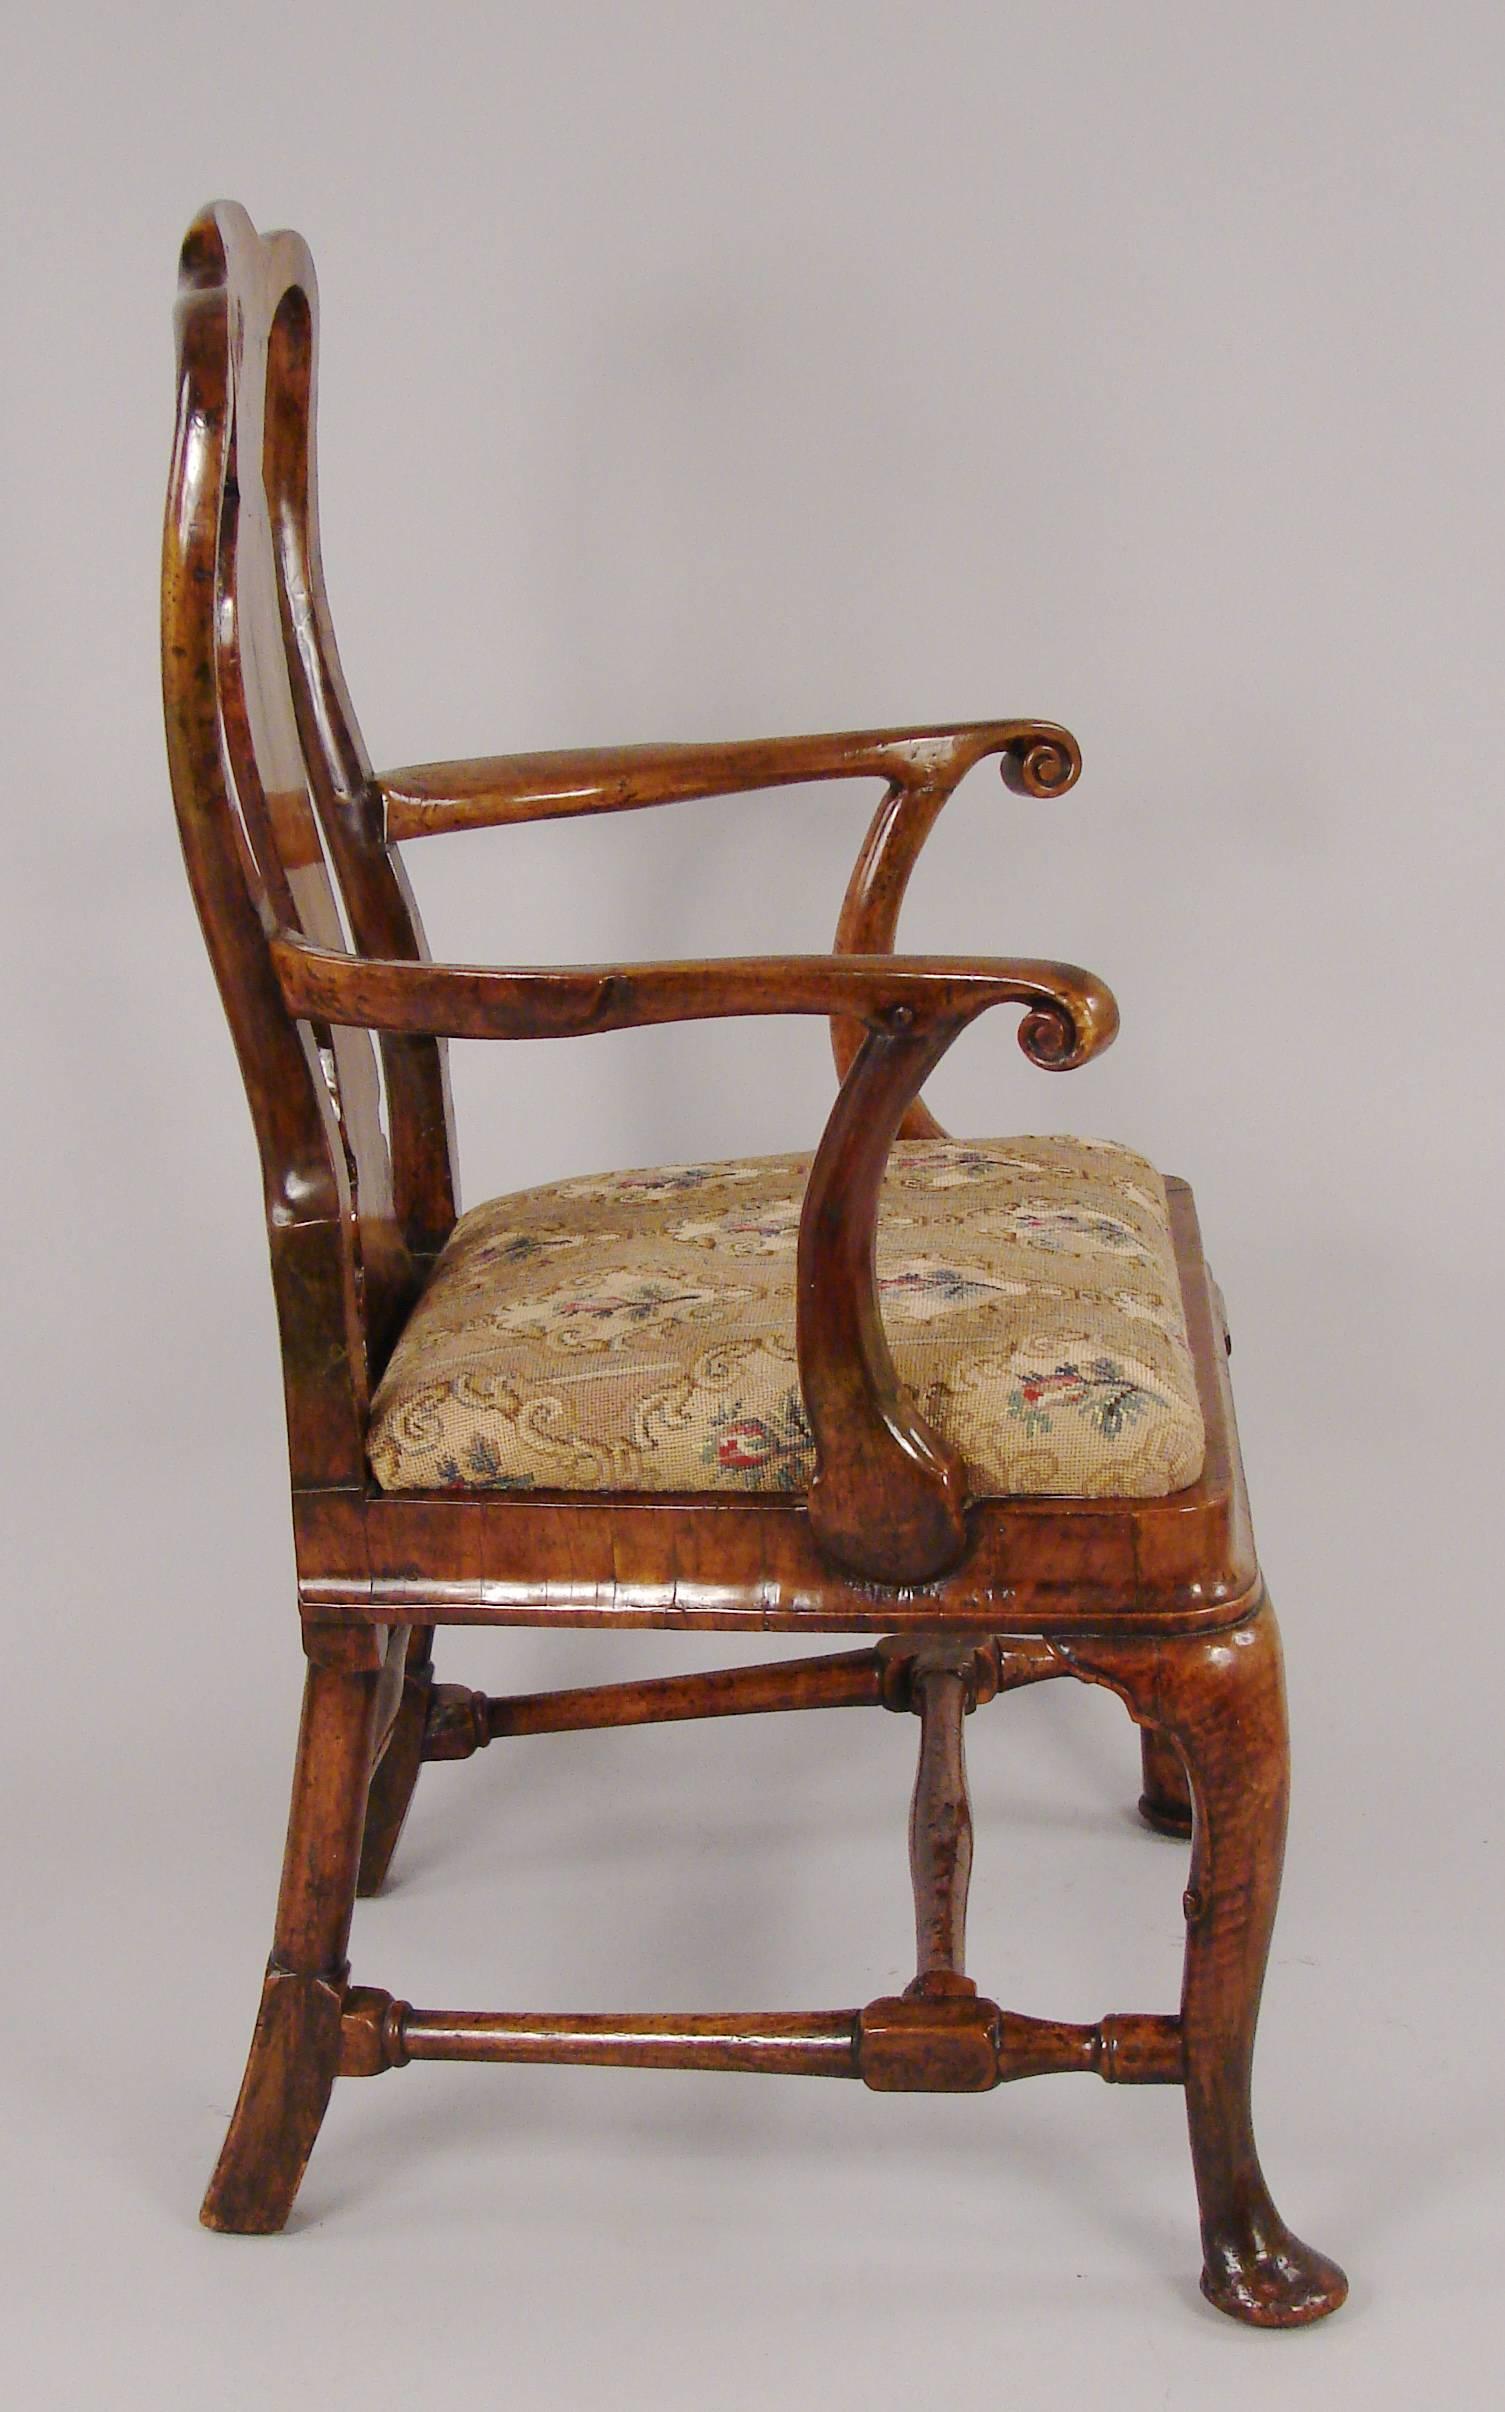 A fine George I walnut veneered open armchair, the inlaid vasiform splat terminating in a shaped seat supported on cabriole legs ending in pad feet joined by a shaped stretcher, circa 1720. Provenance: Florian Papp, N.Y.C.